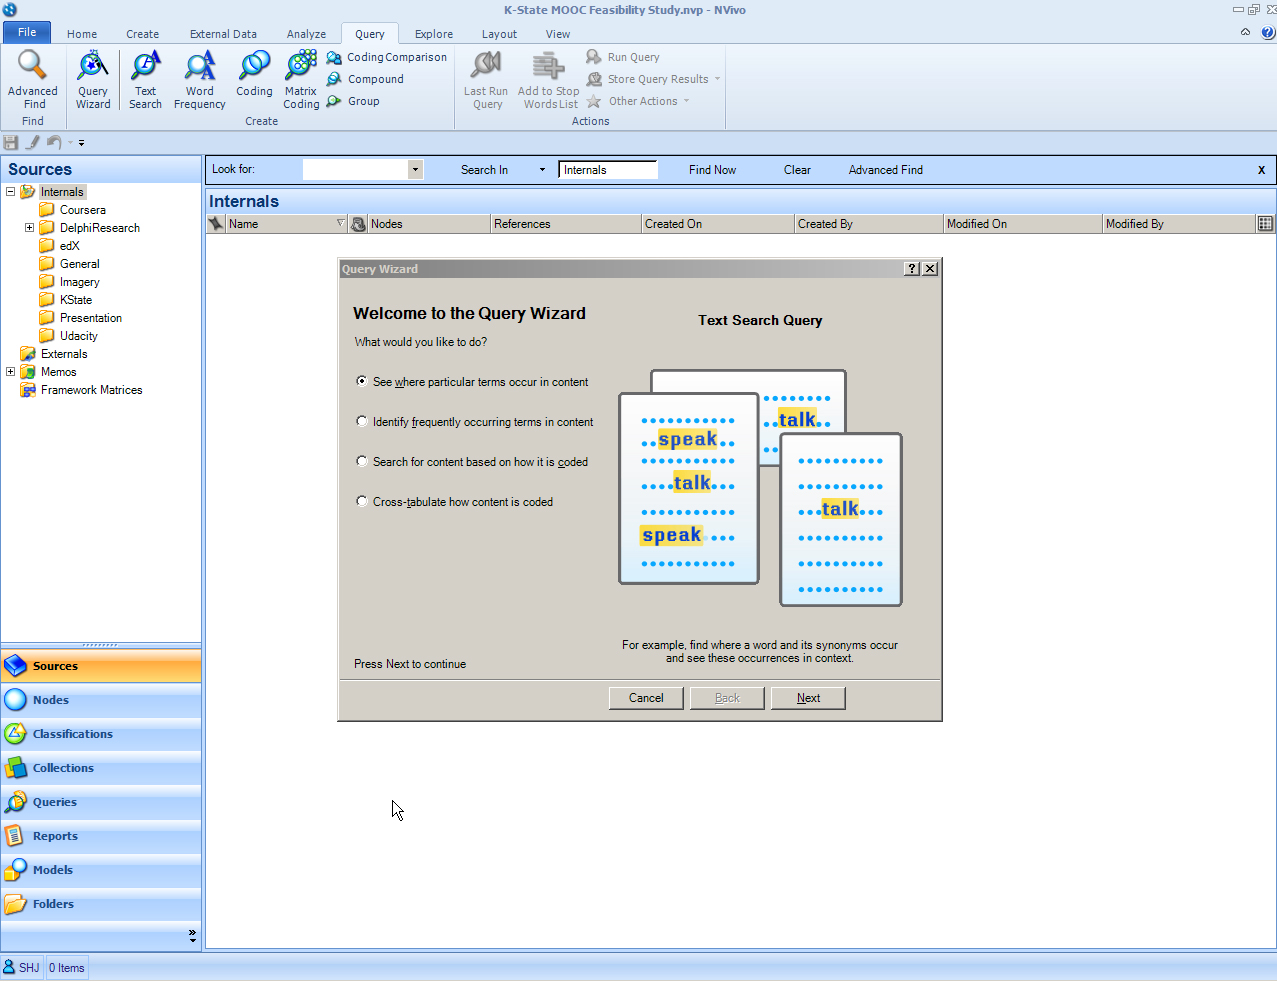 Conducting Queries in NVivo